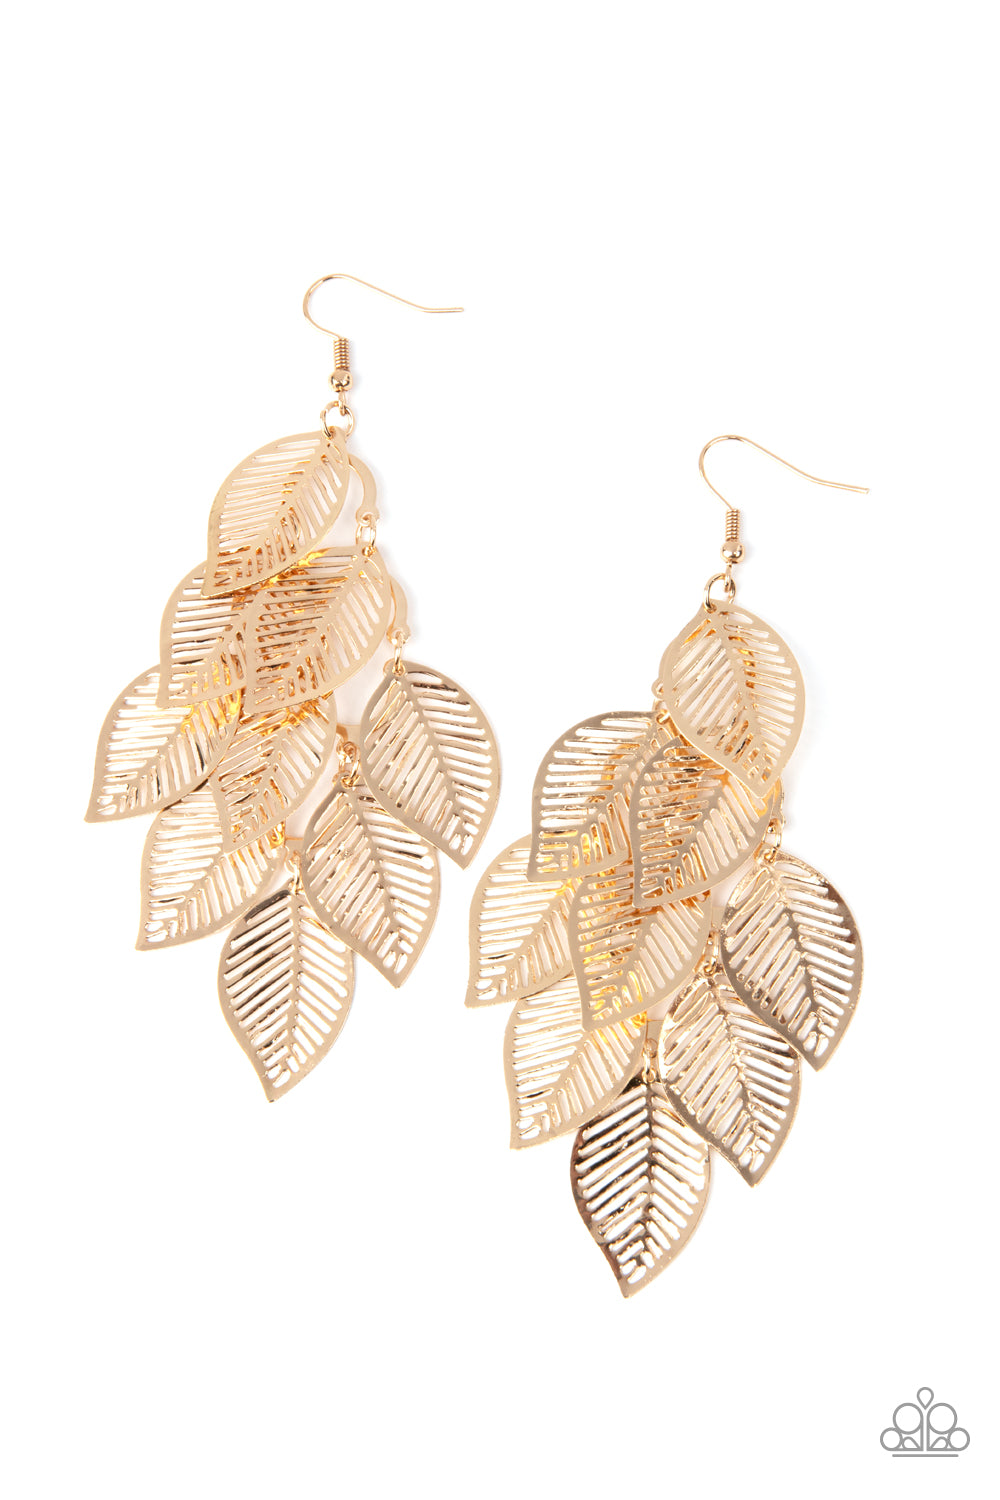 Limitlessly Leafy Gold Paparazzi Earring Cashmere Pink Jewels